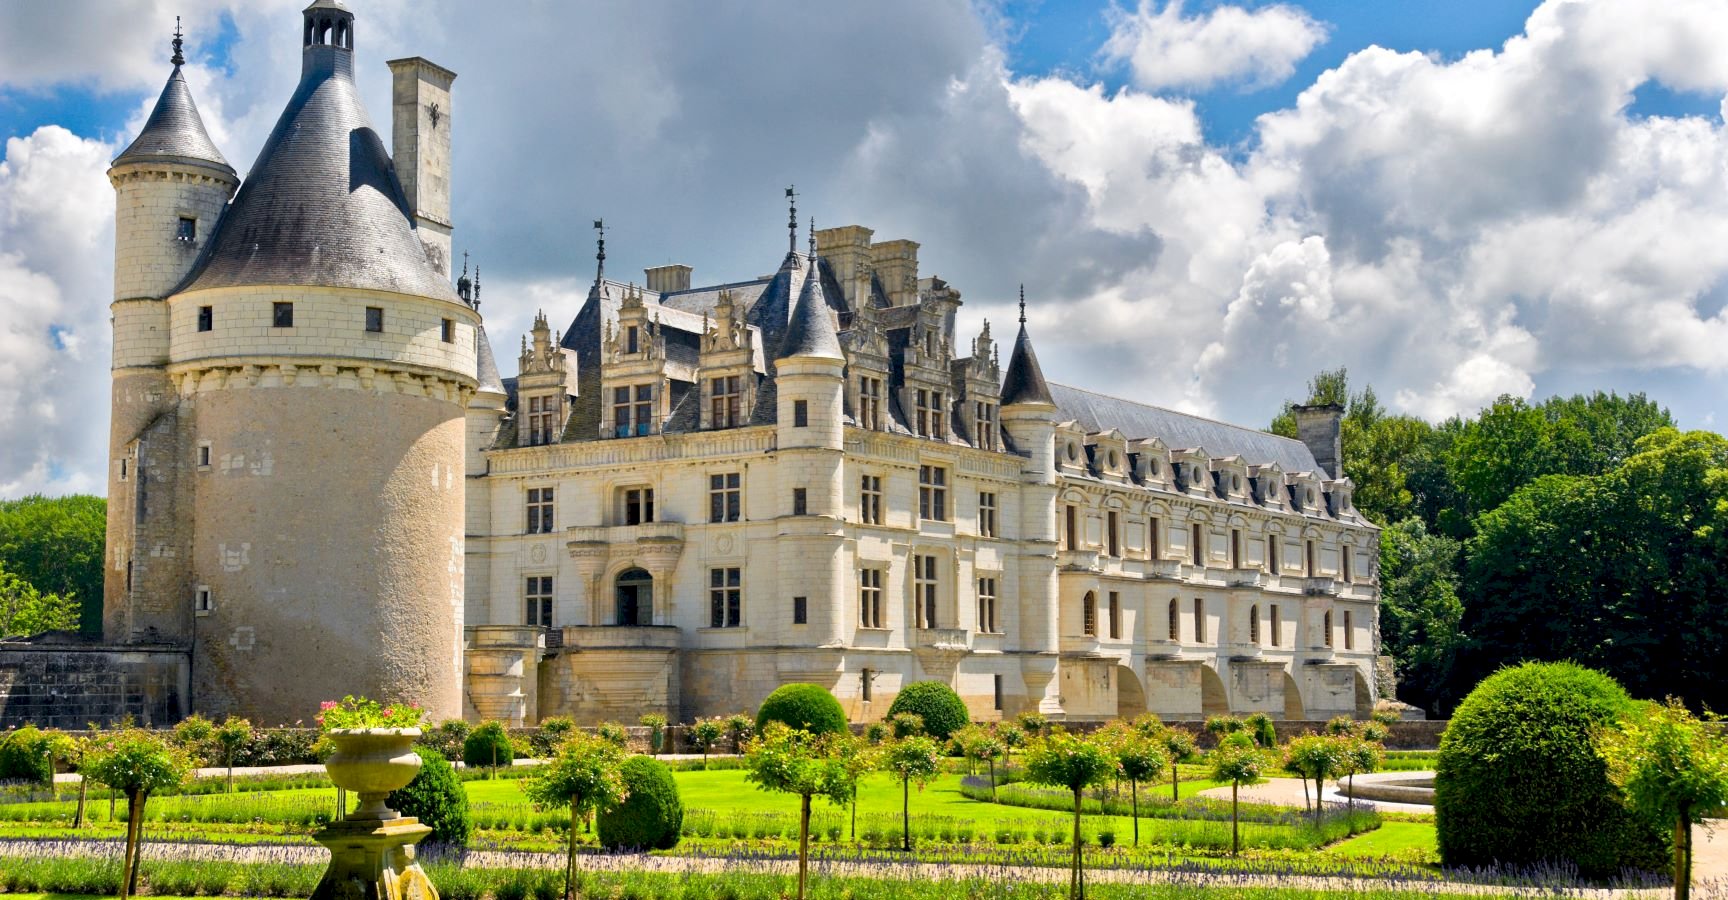 Ophorus Tours - 4 Days Small Group Loire Valley Package - 4* Hotel